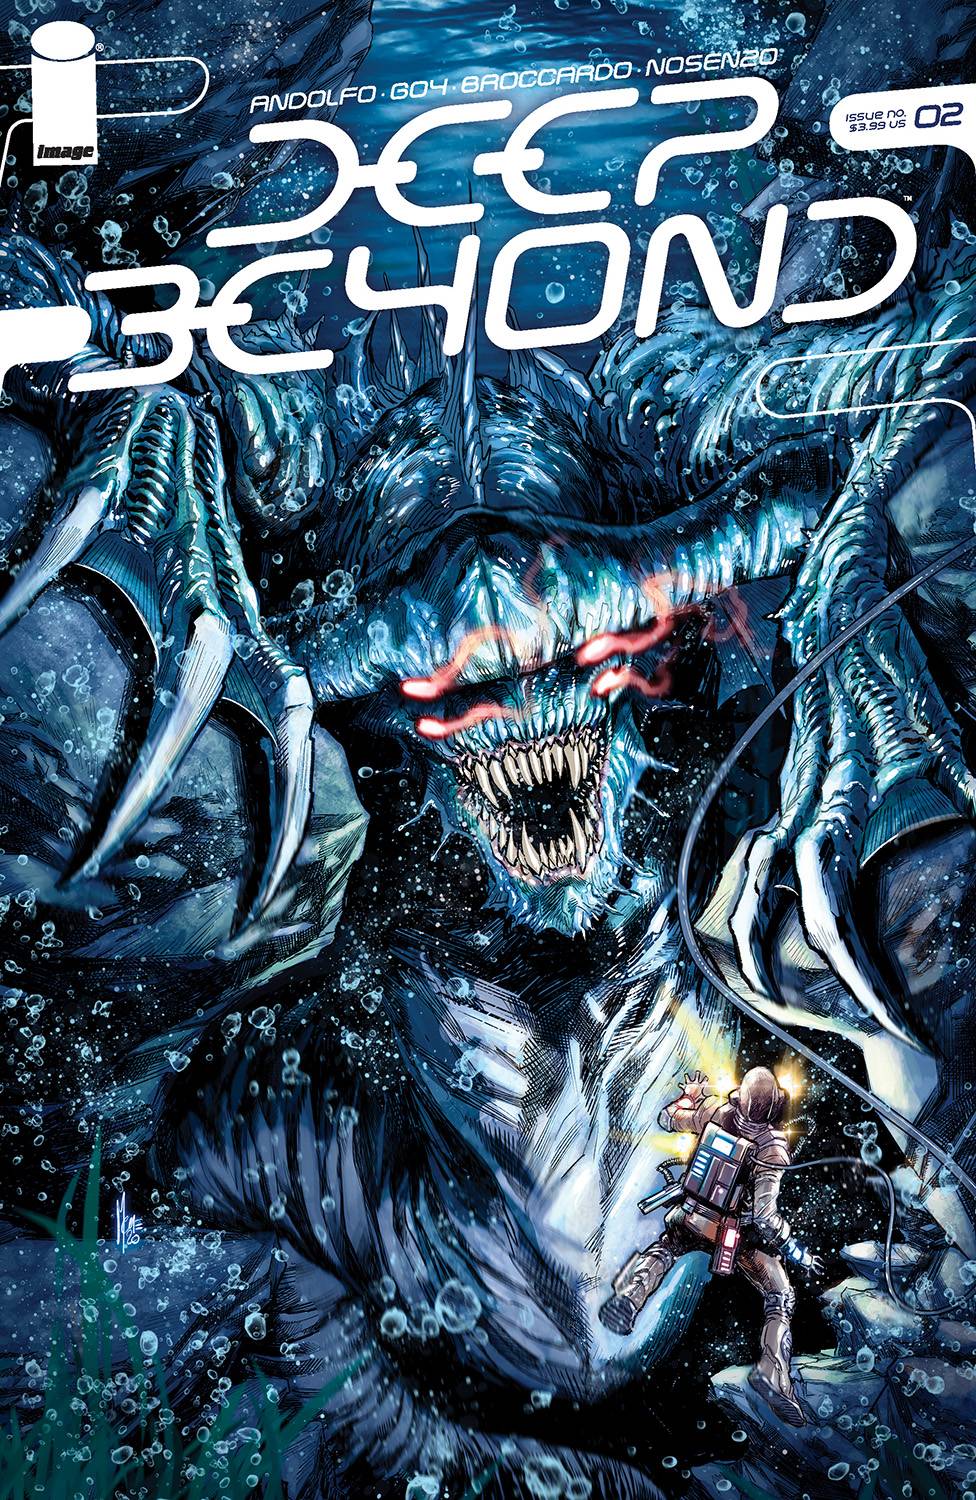 Deep Beyond #2 Cover D Checchetto (Of 12)